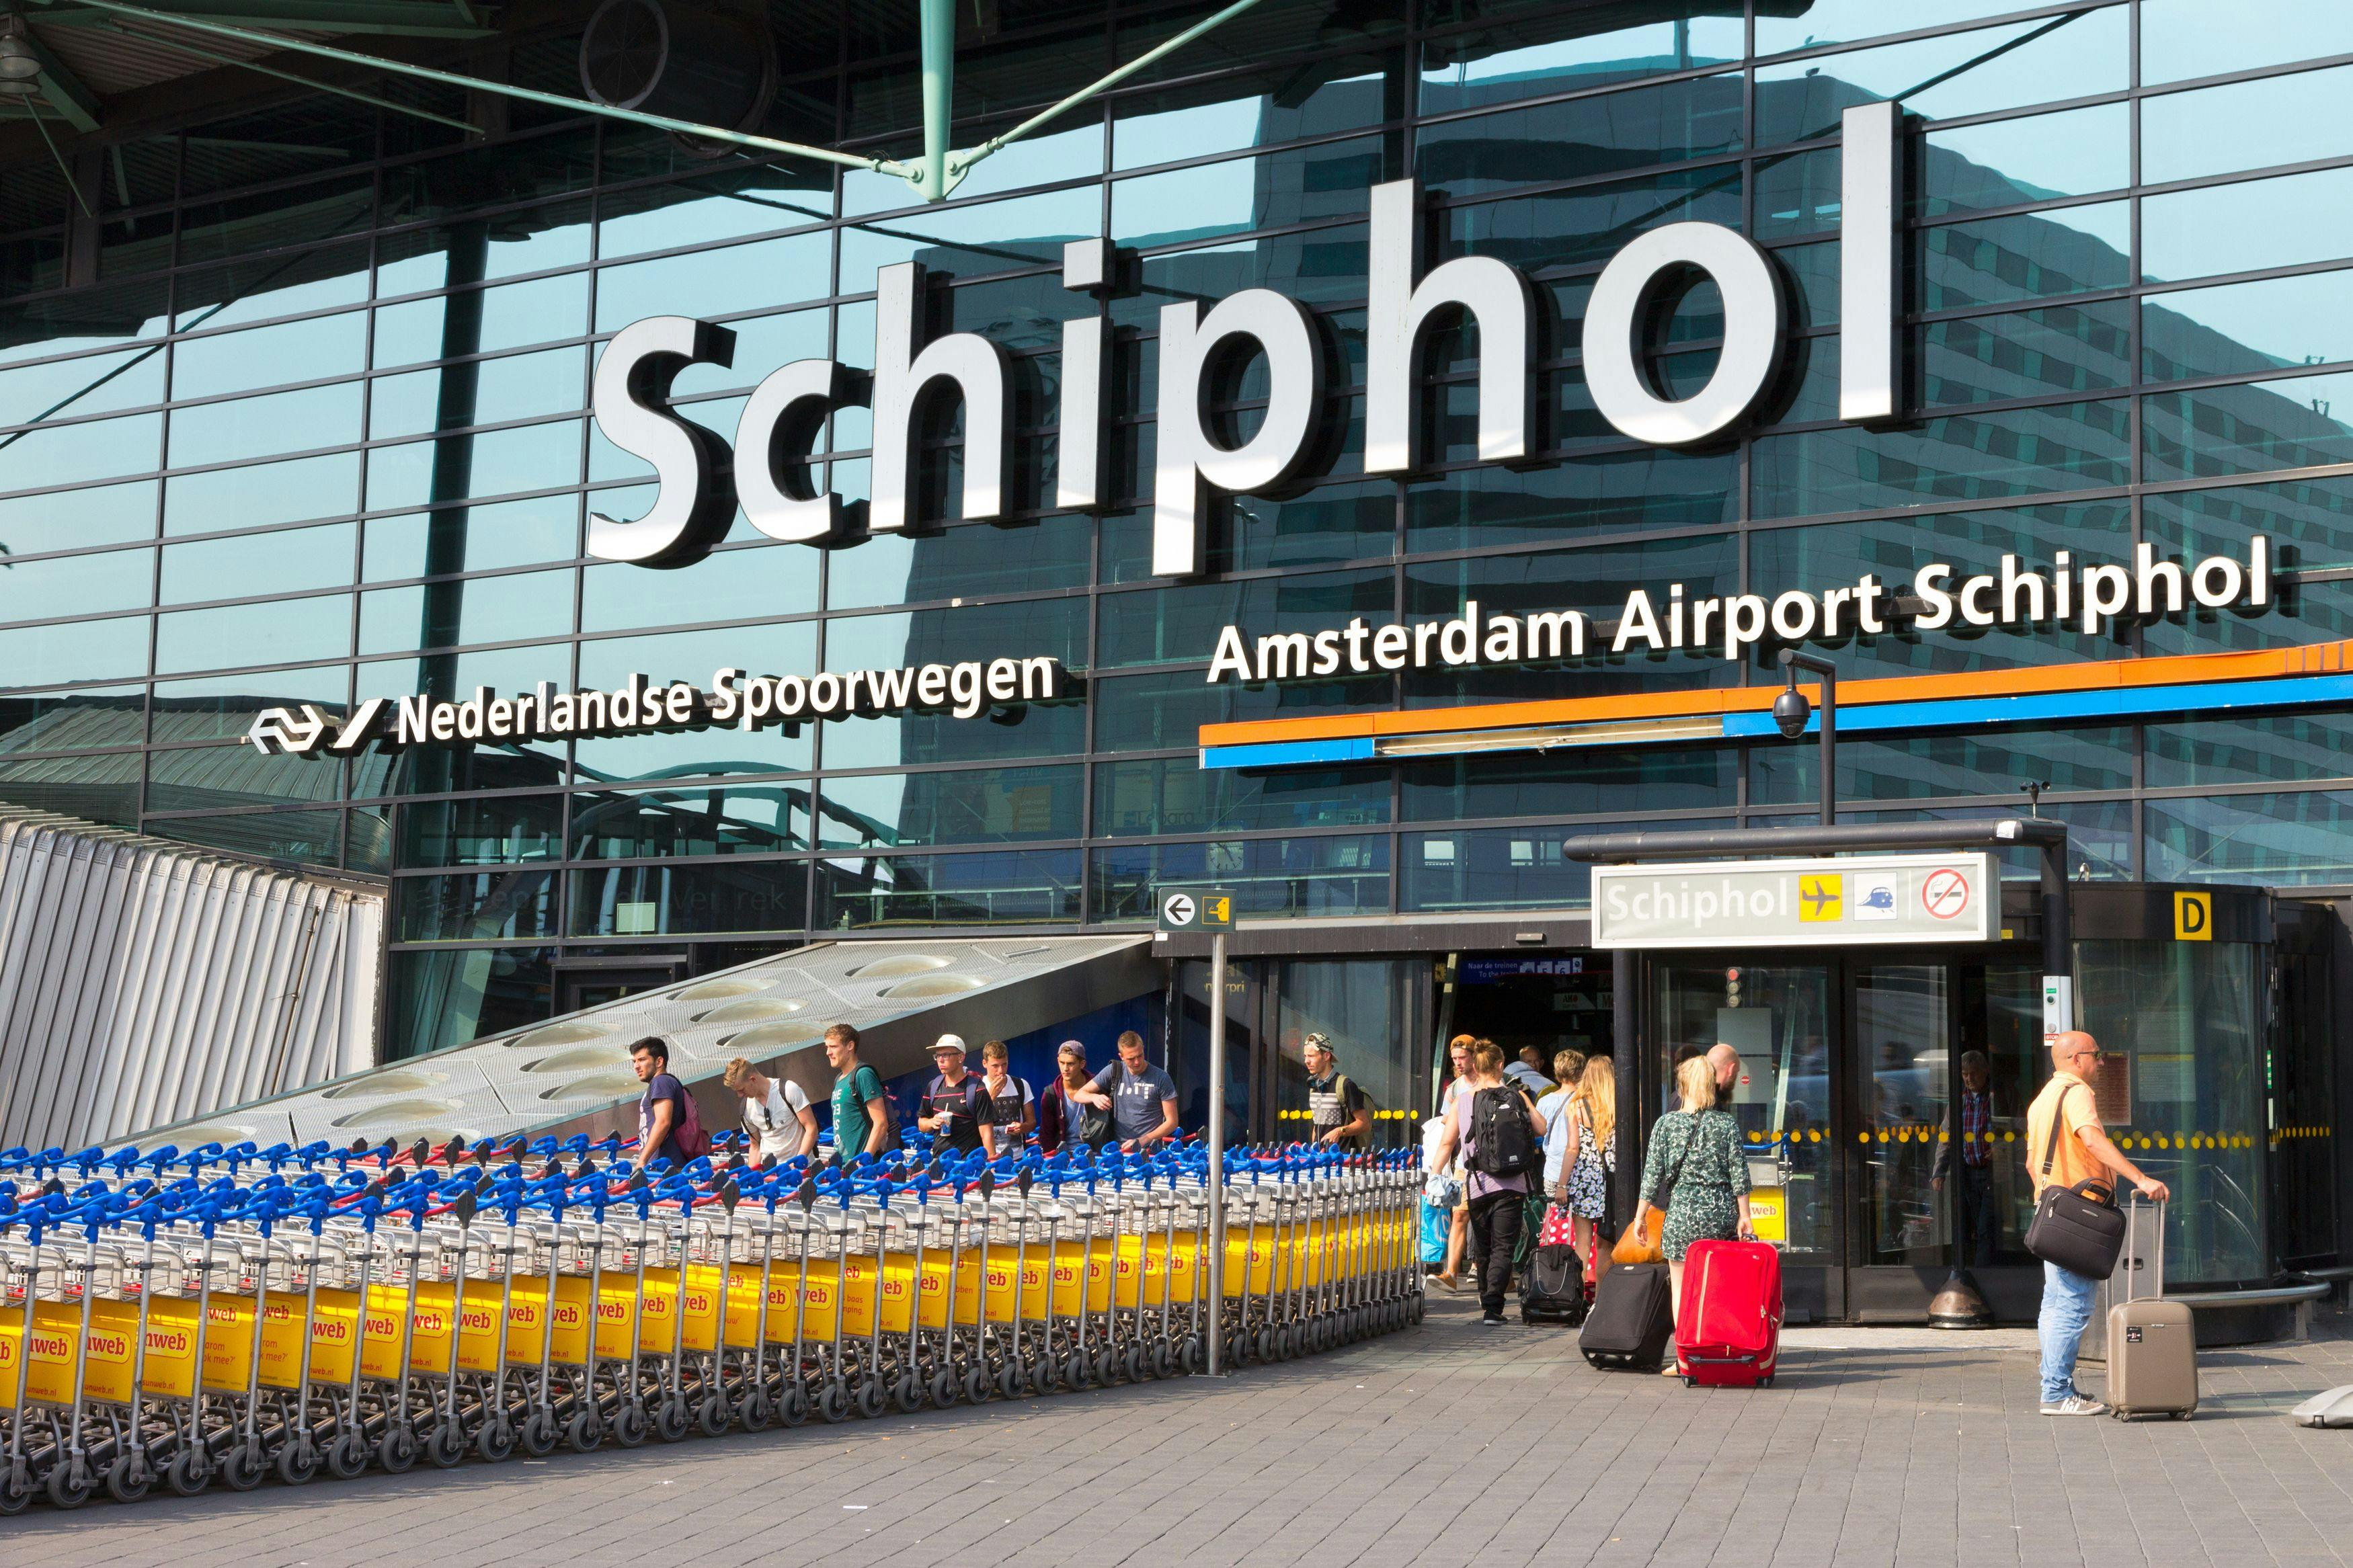 outside view Amsterdam Schiphol Airport